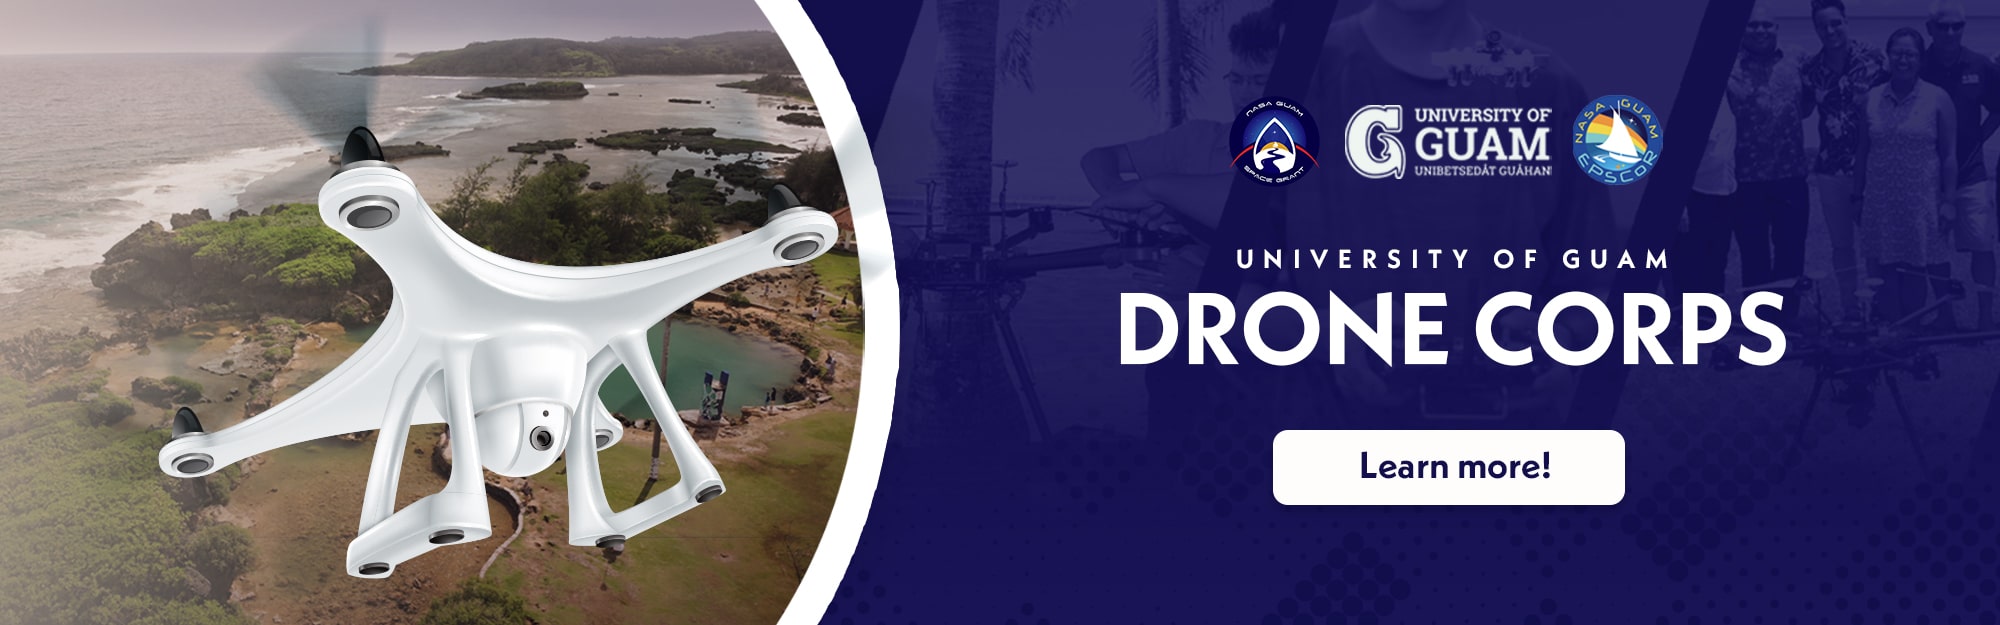 Learn more about the University of Guam Drone Corps